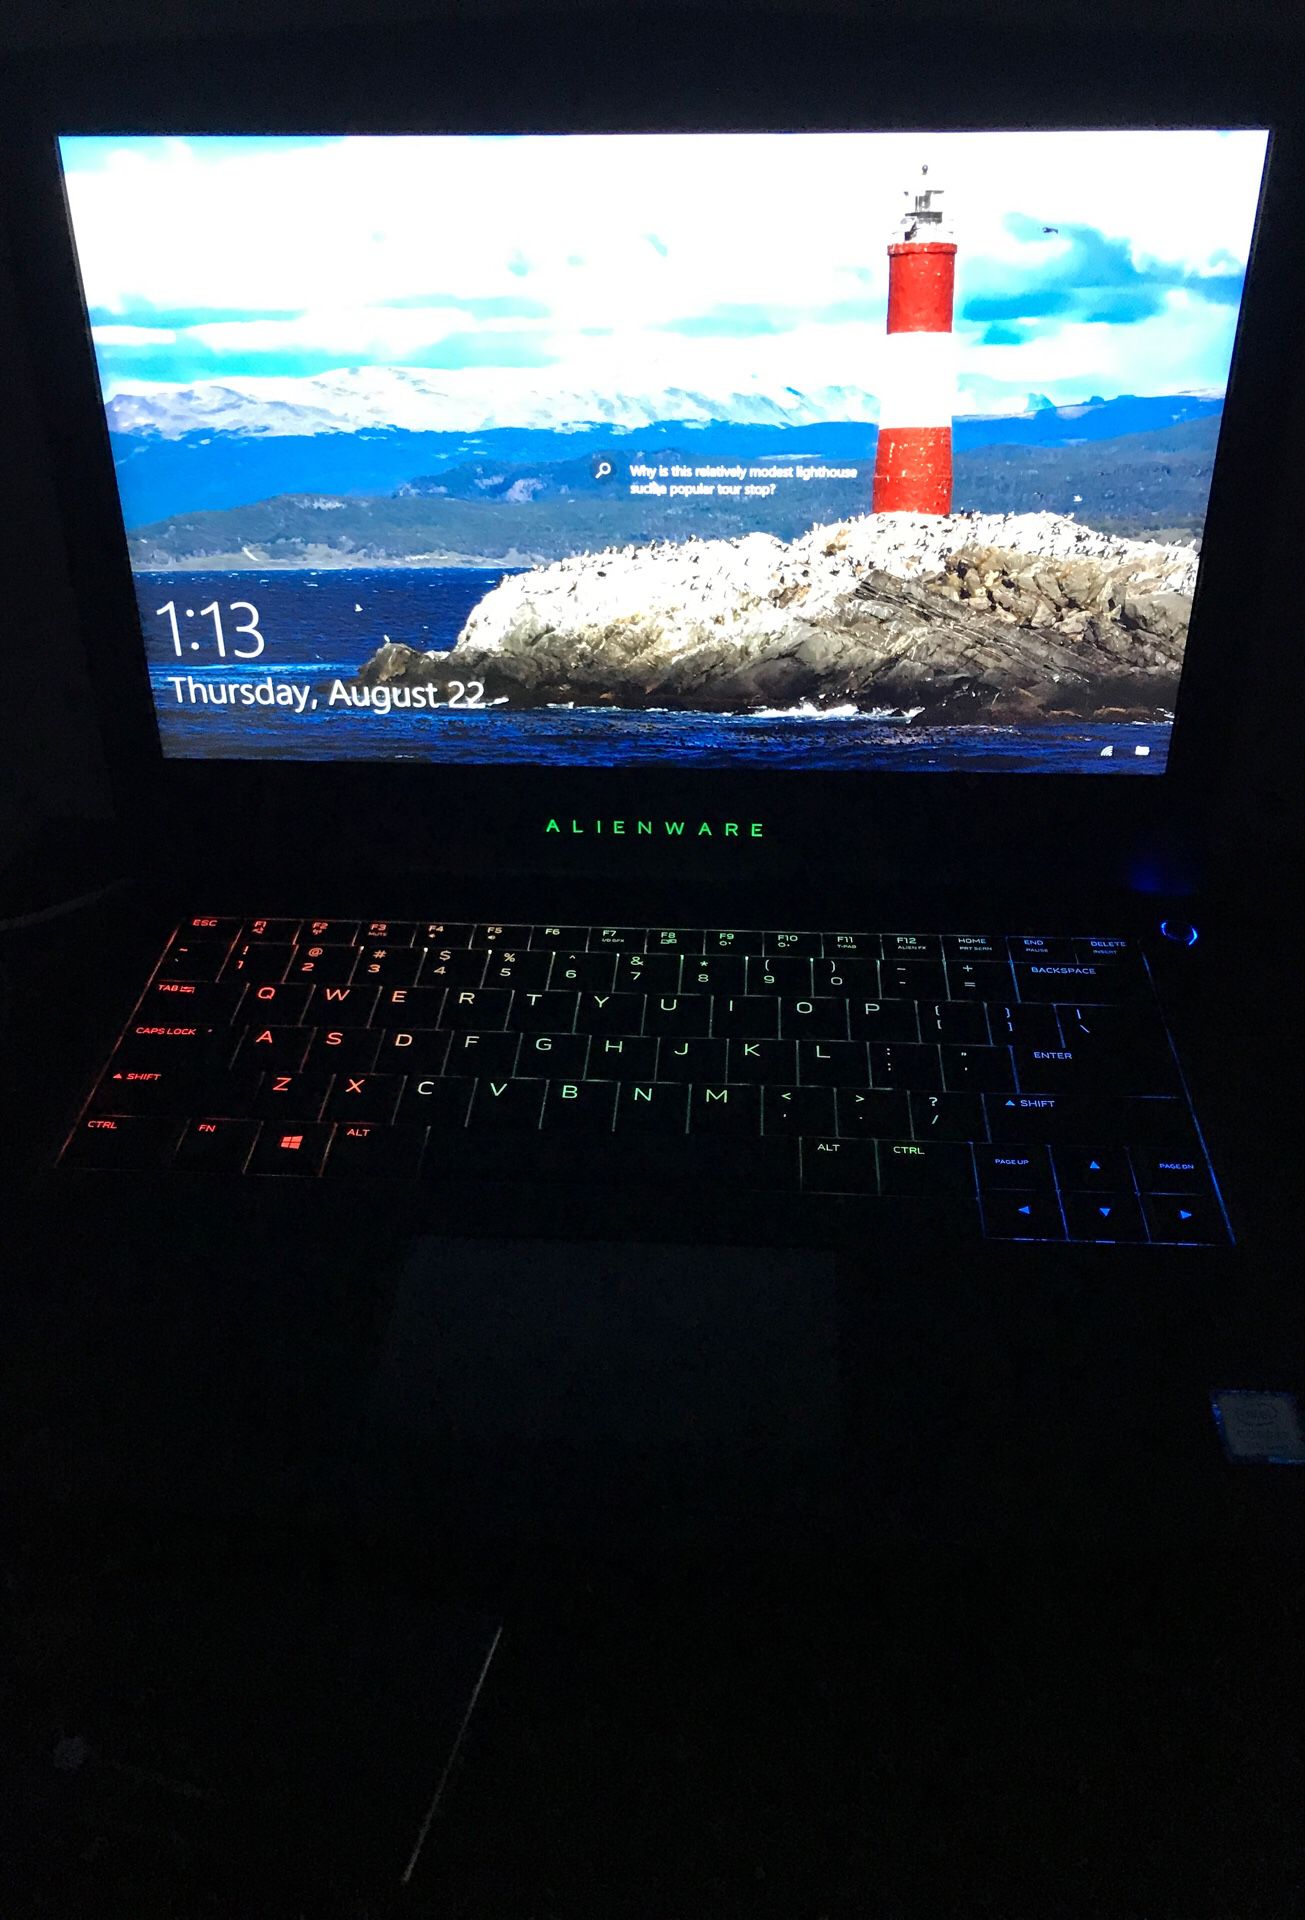 Alienware 13 r3 laptop keyboard and mouse